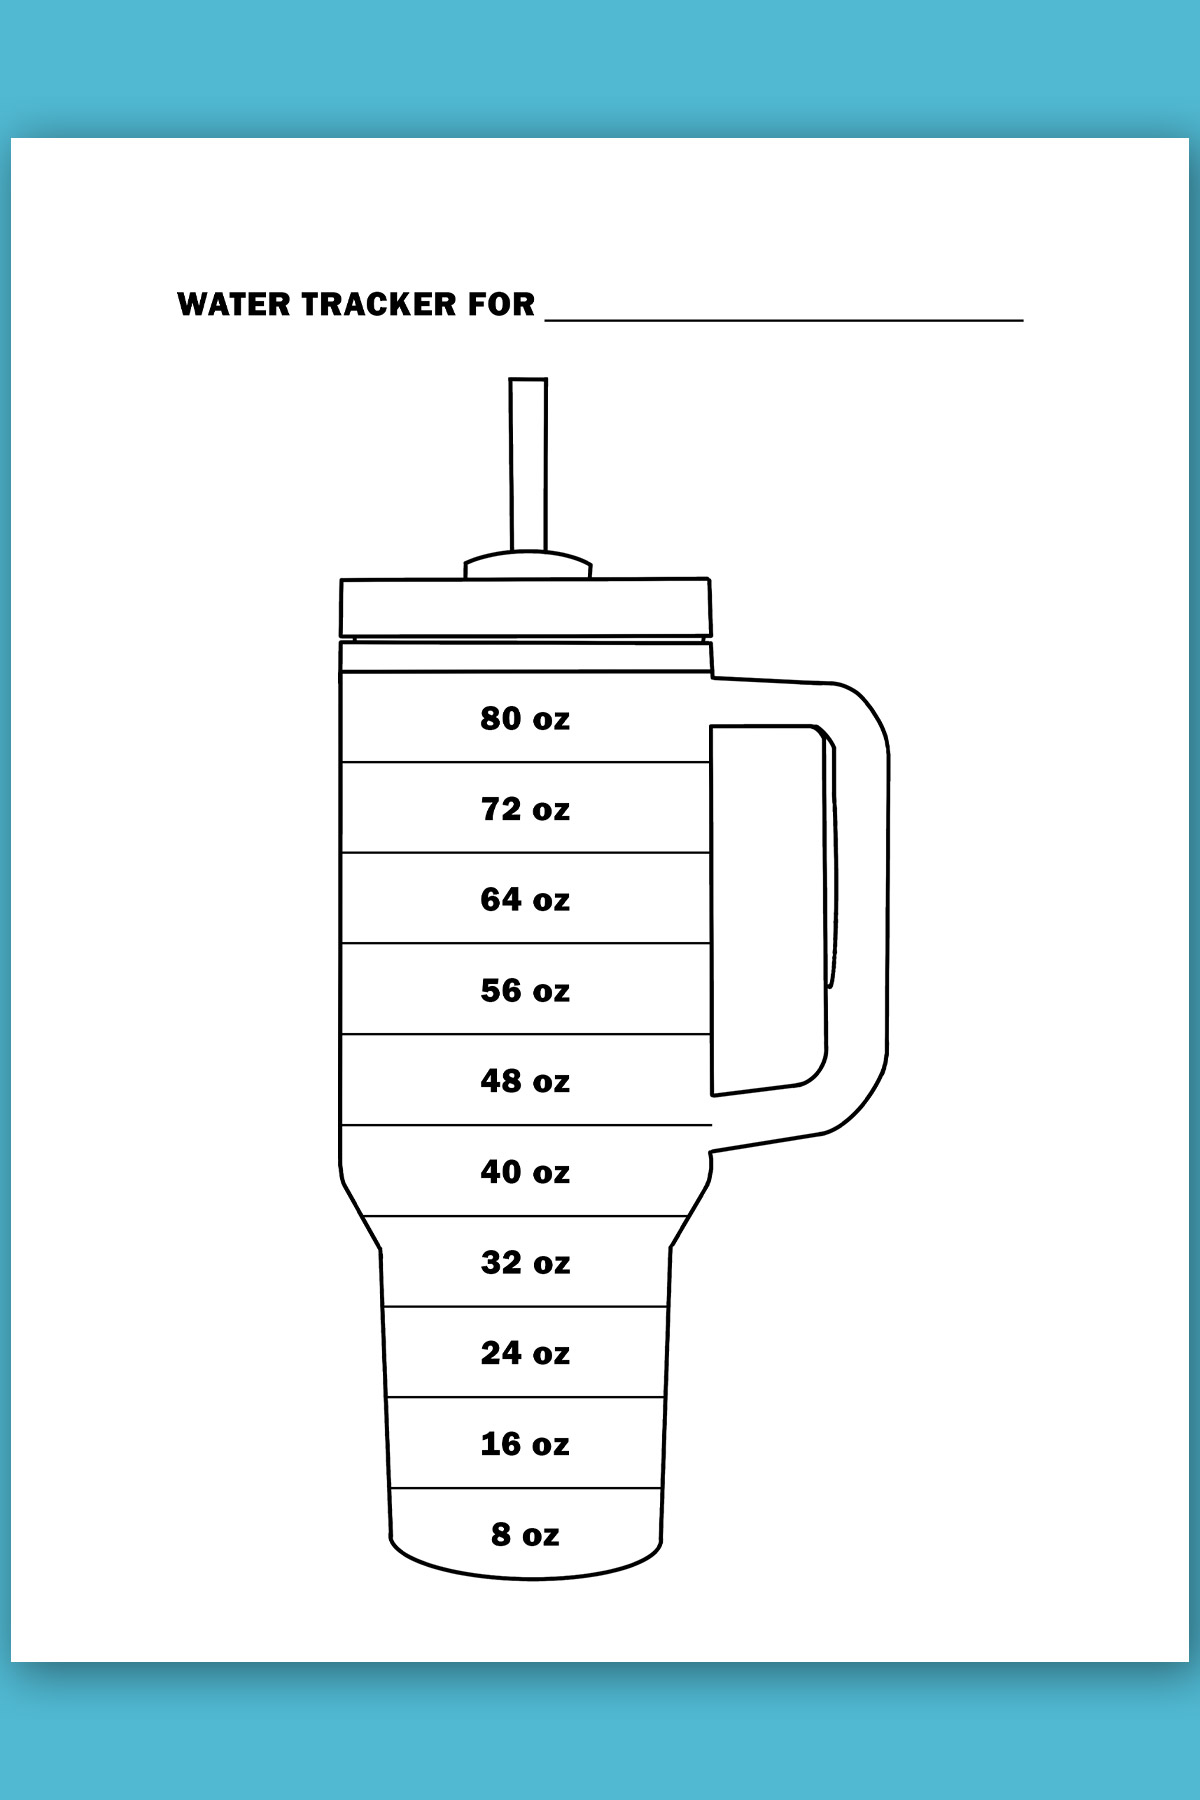 This image is an example of one of the water tracker printable options from the free printable water tracker set you can get for free in this blog post. It's an example of a 80 oz daily option.